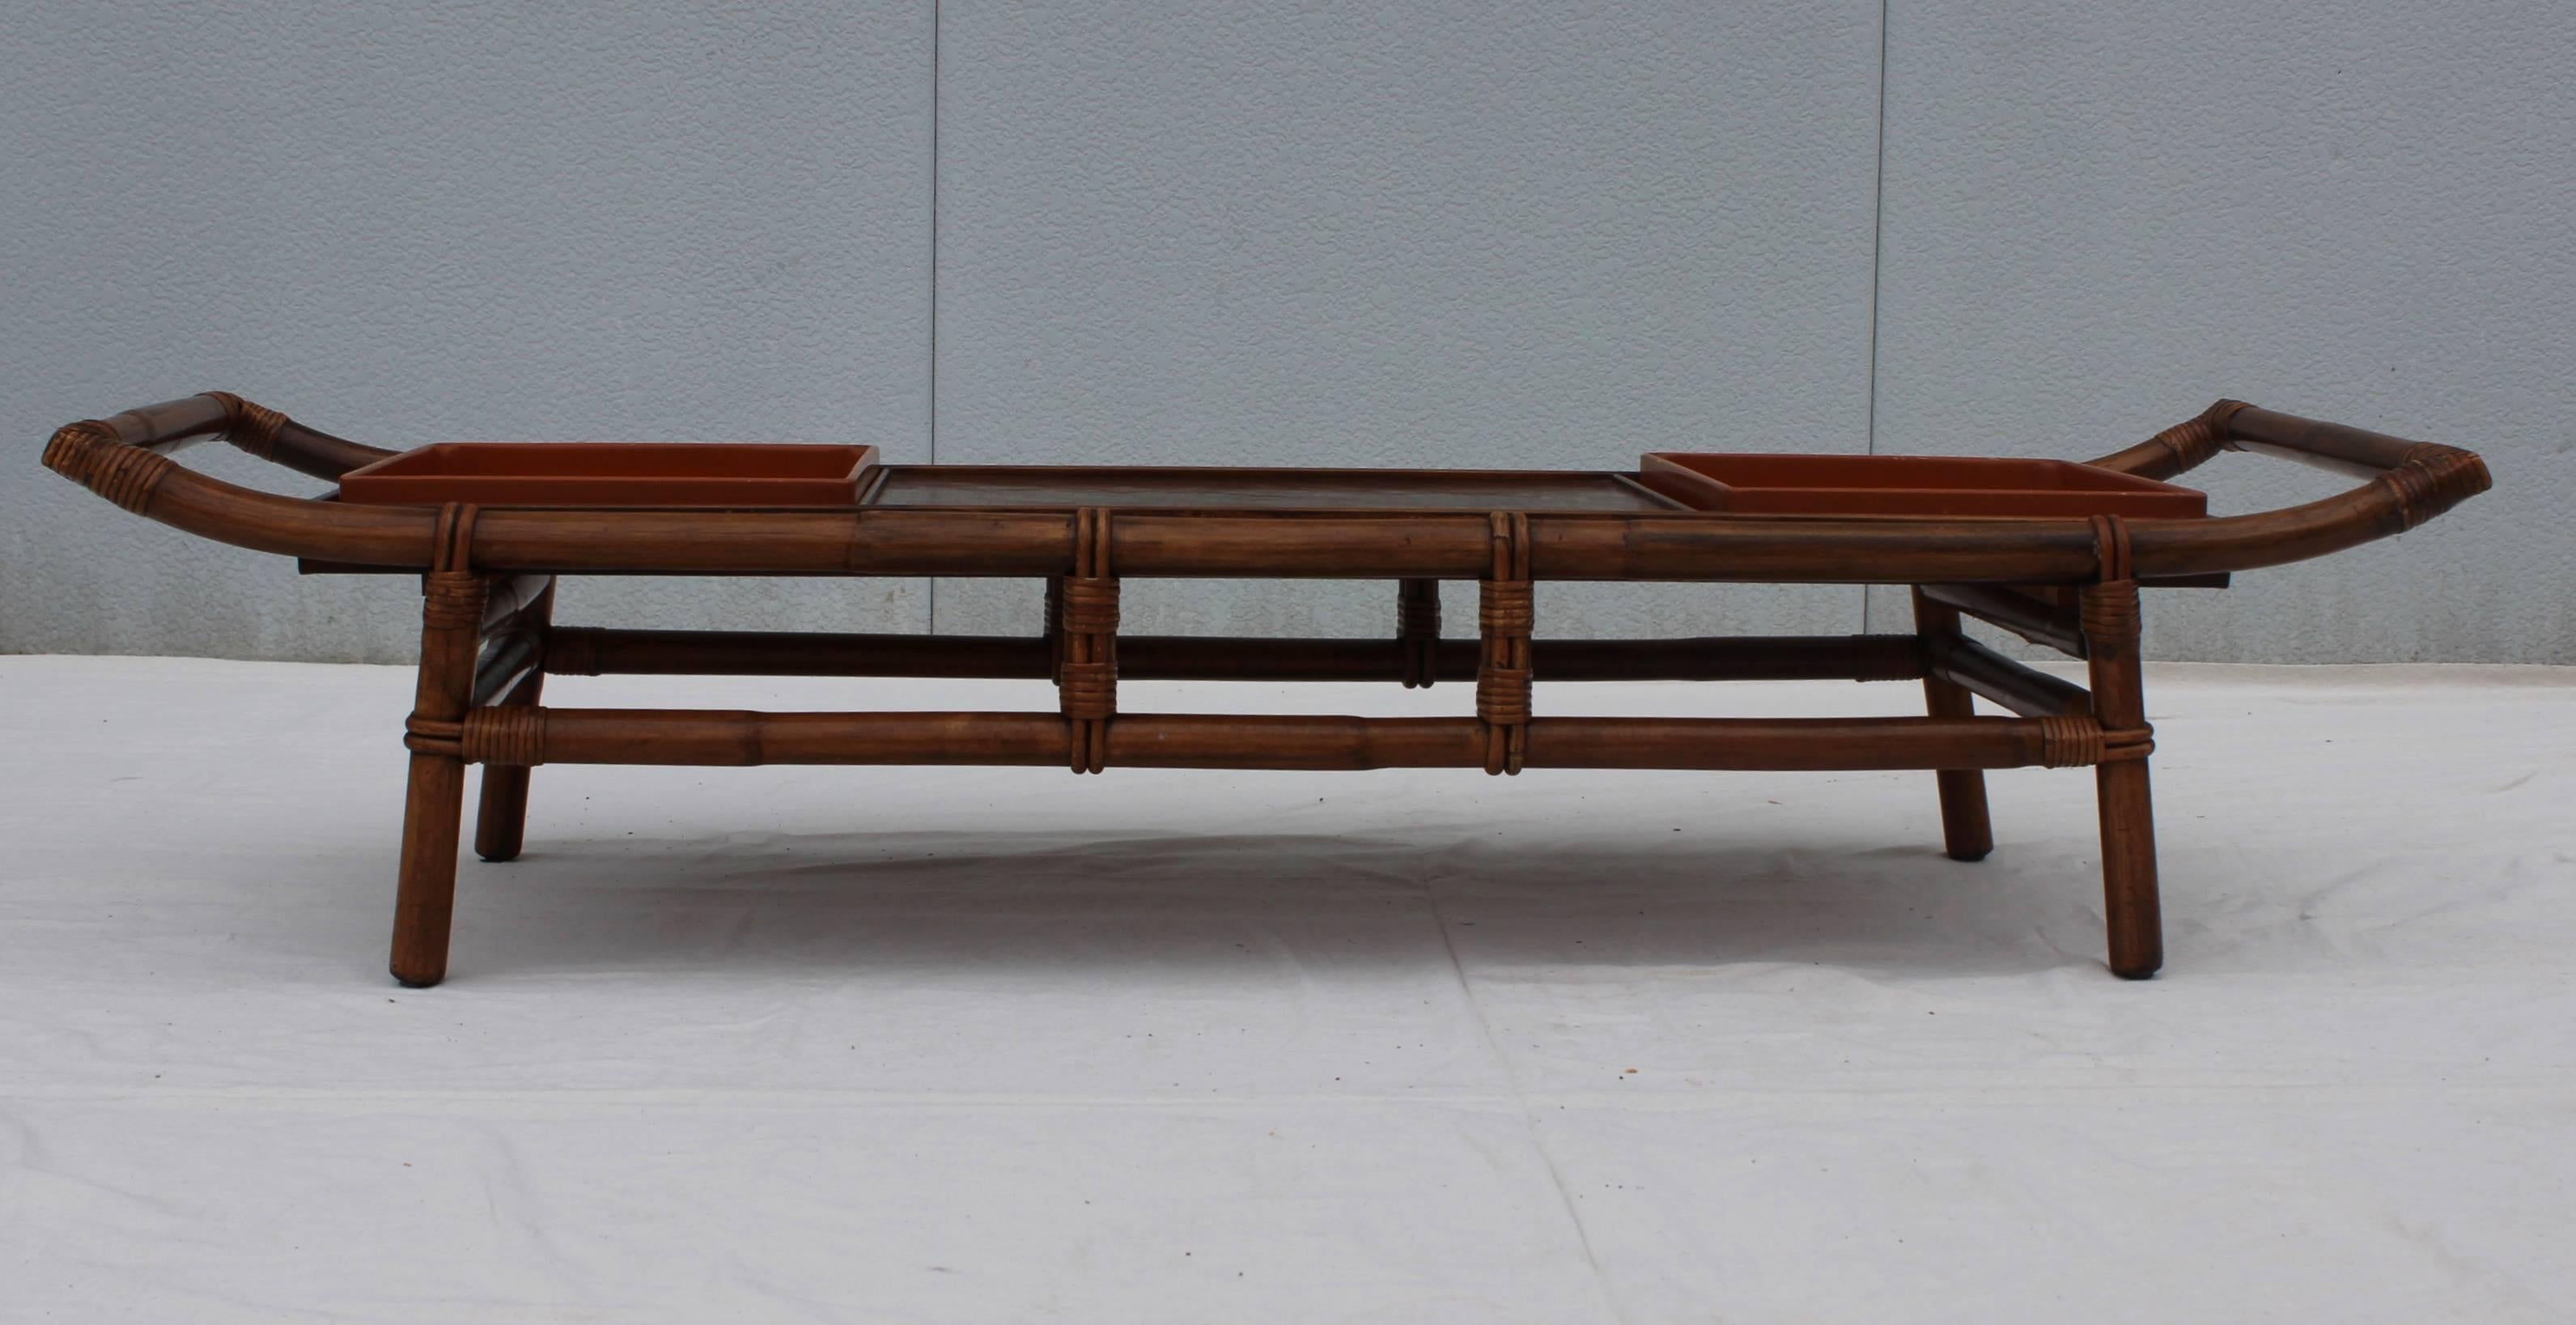 1950s John Wisner designed for Ficks Reed Pagoda bamboo and rattan coffee table, with removable trays.